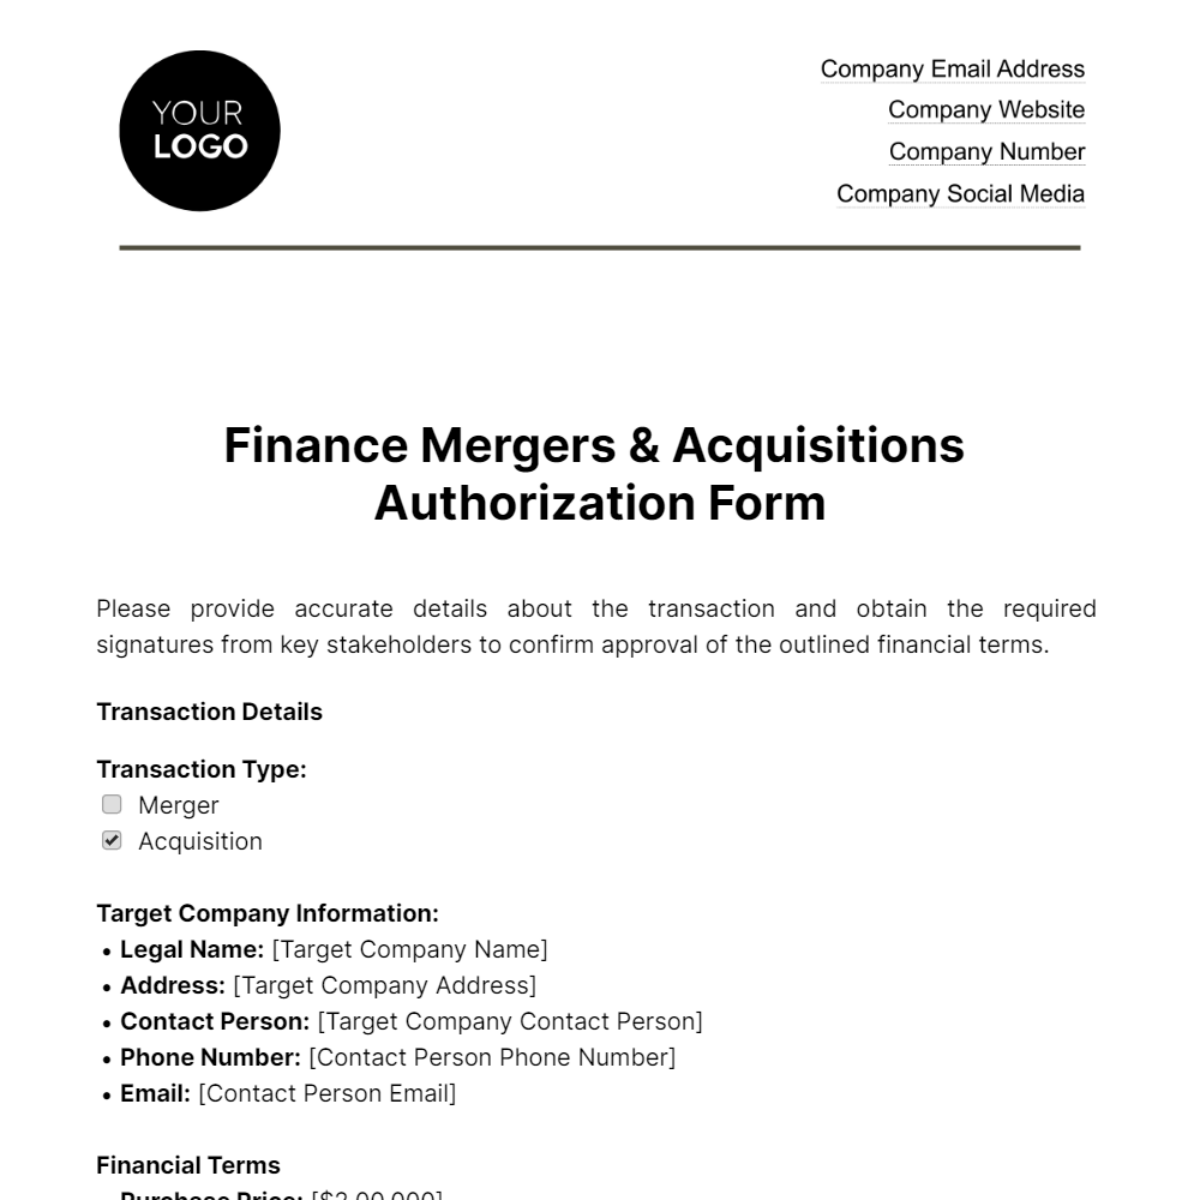 Free Finance Mergers & Acquisitions Authorization Form Template